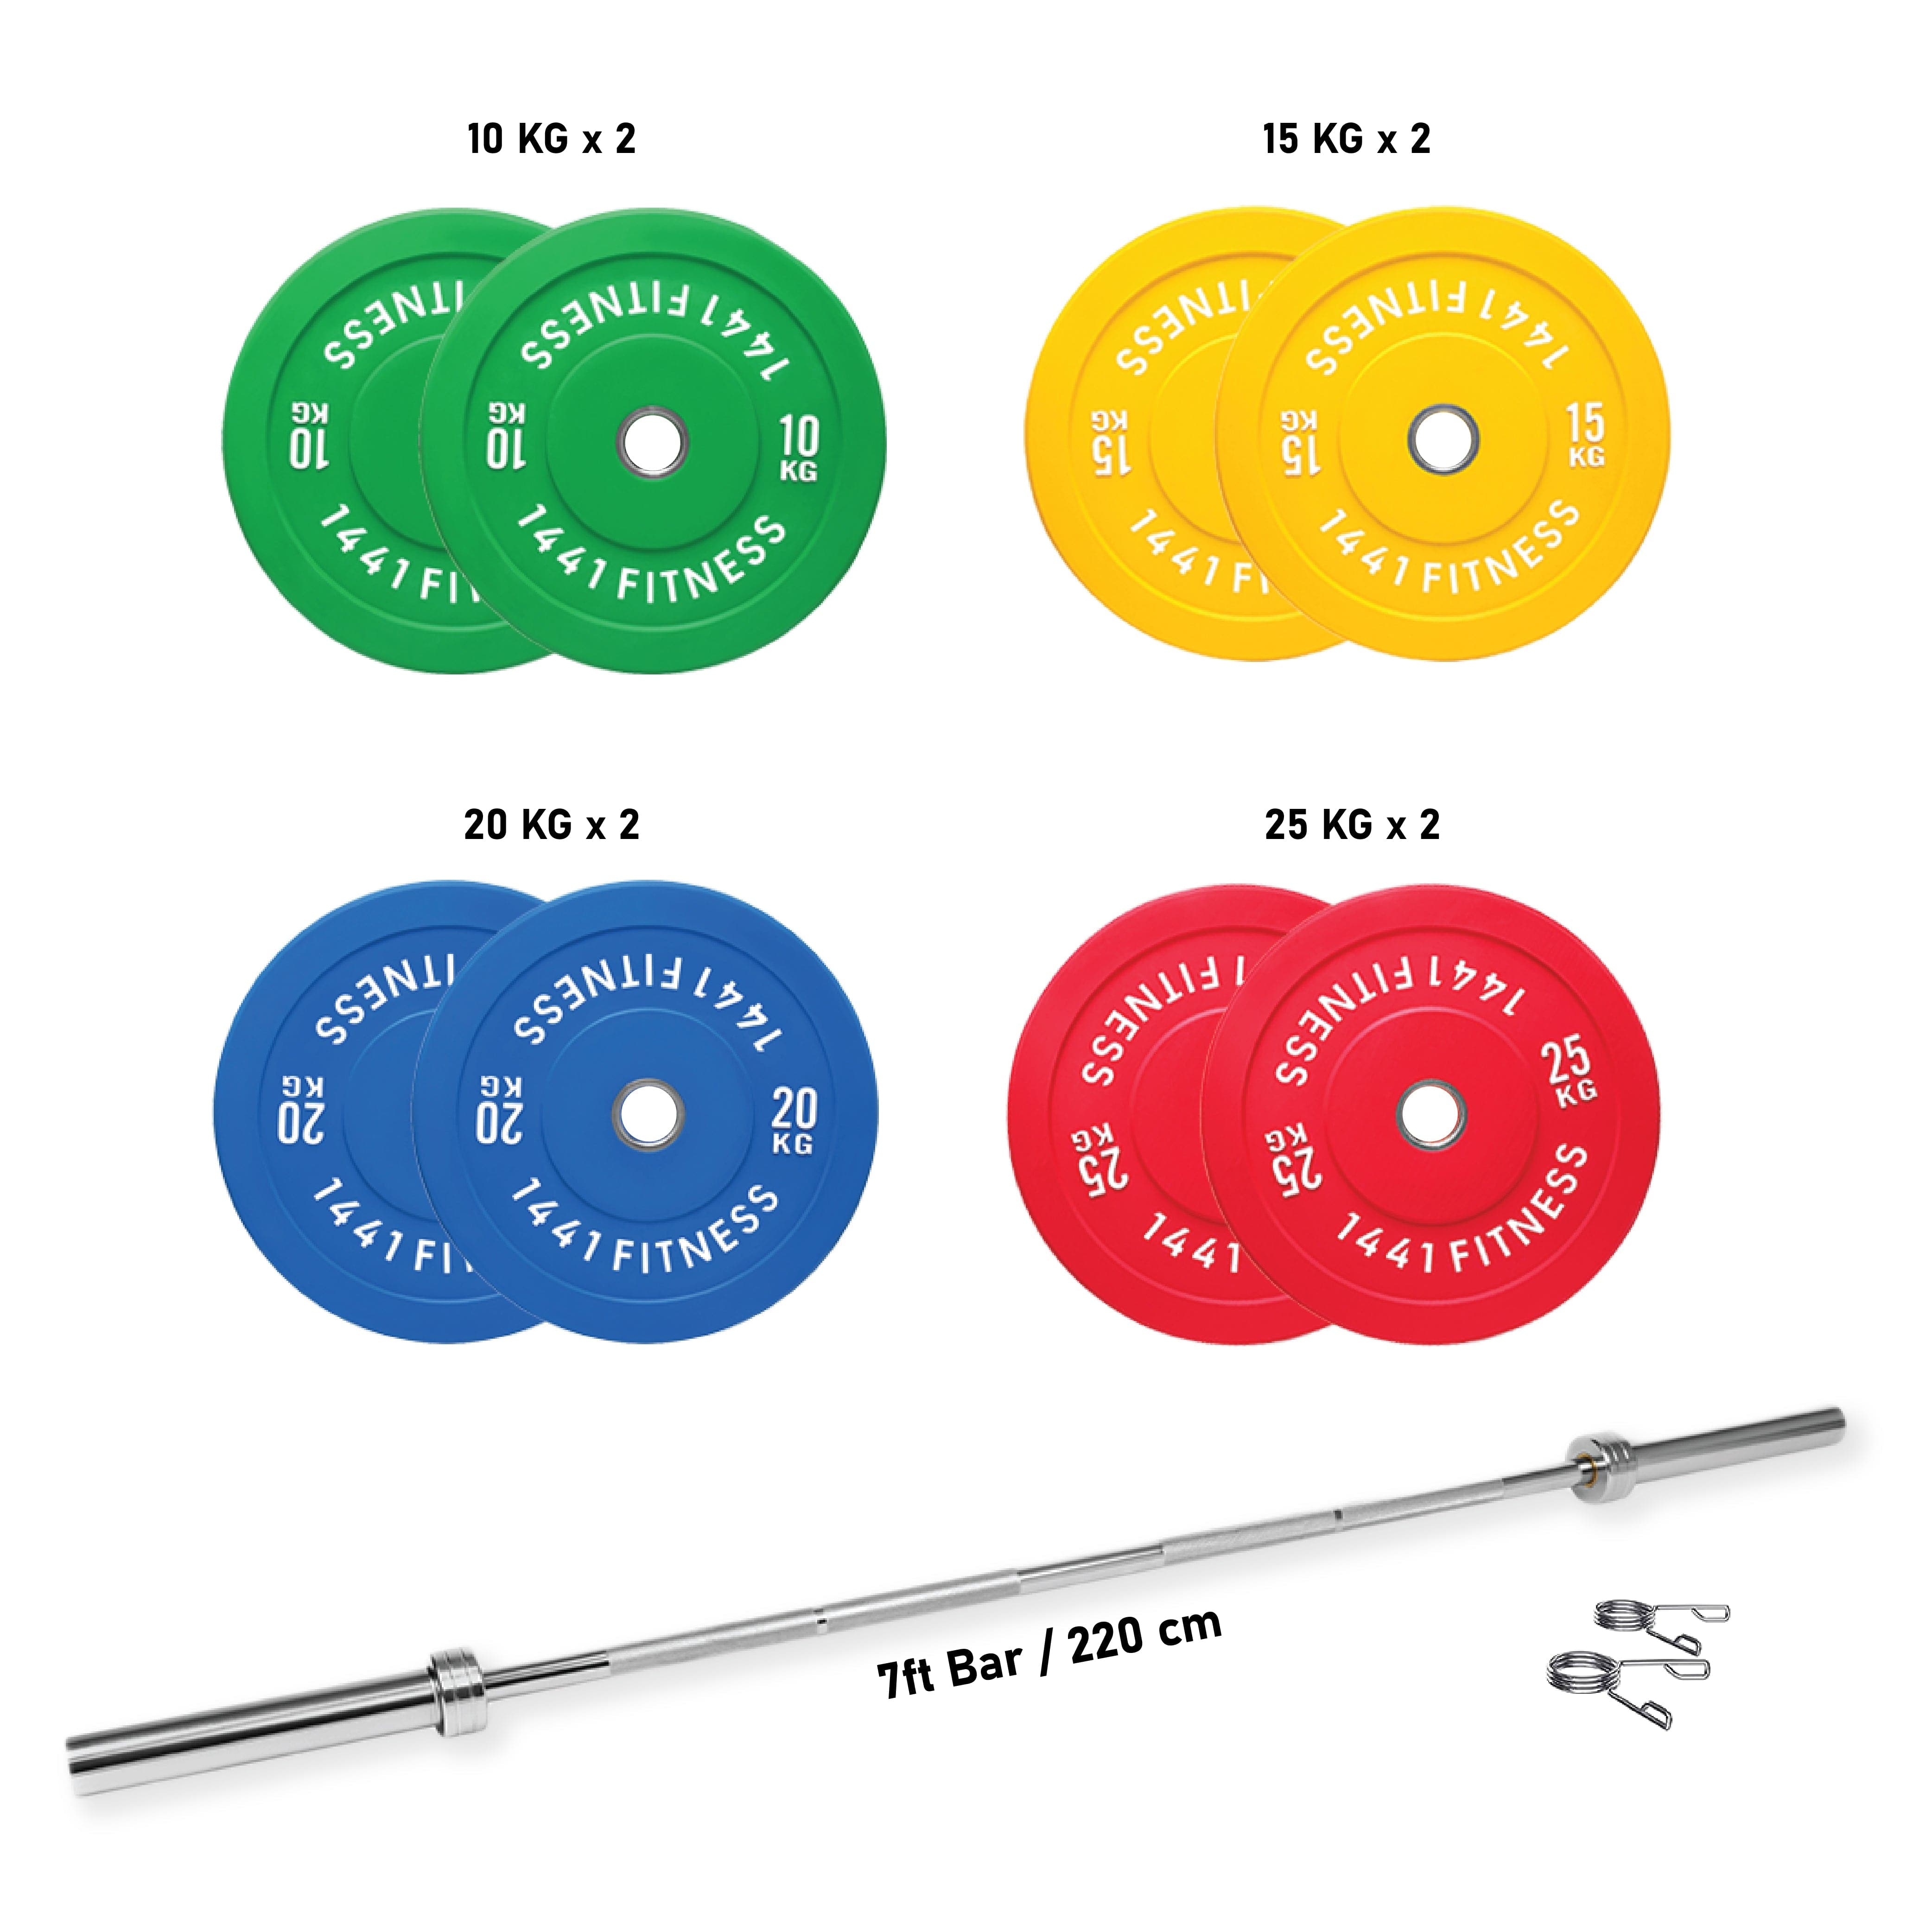 Combo 7 Ft Olympic Barbell And Color Bumper Plate Set - 160 KG | 1441 Fitness - Athletix.ae